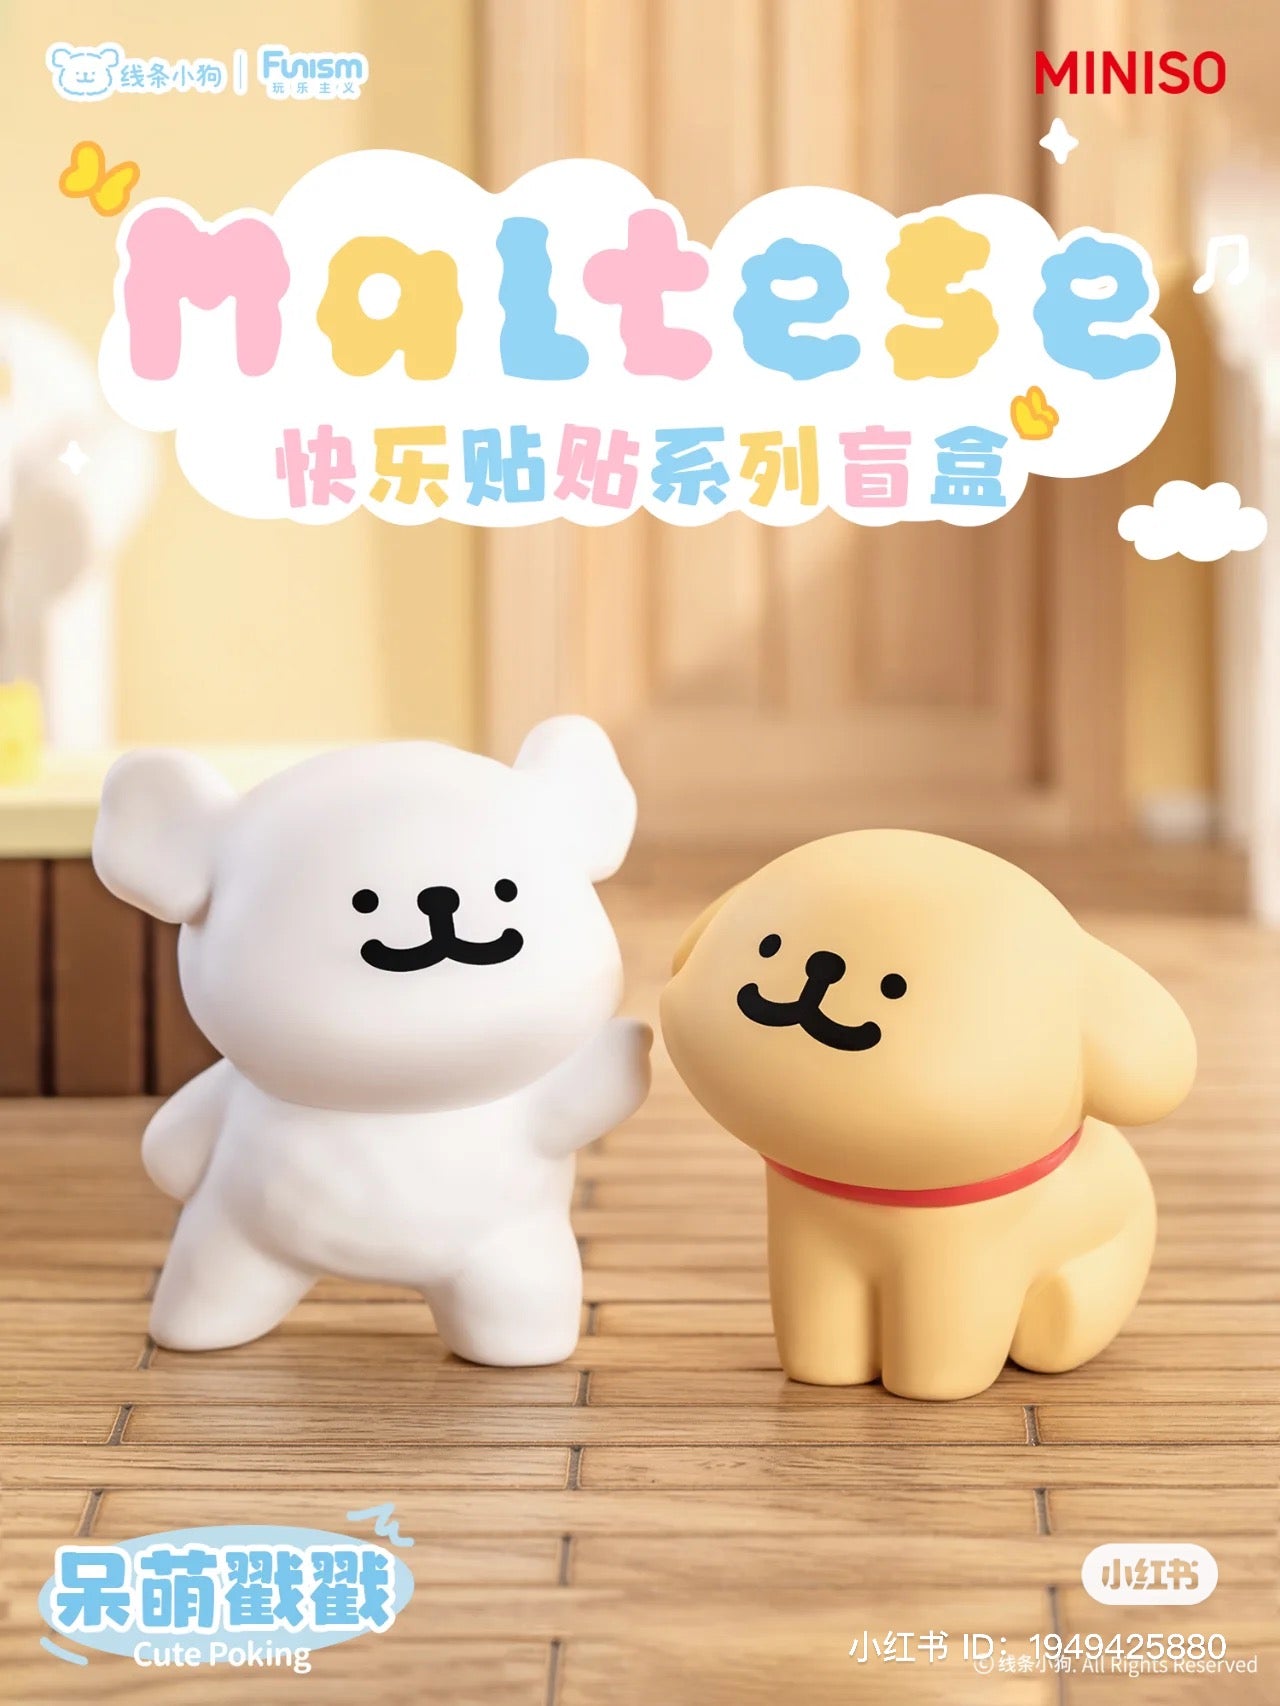 A blind box series featuring Maltese Happy Snuggling toys. Includes 6 regular designs and 1 secret. From Strangecat Toys, a blind box and art toy store.